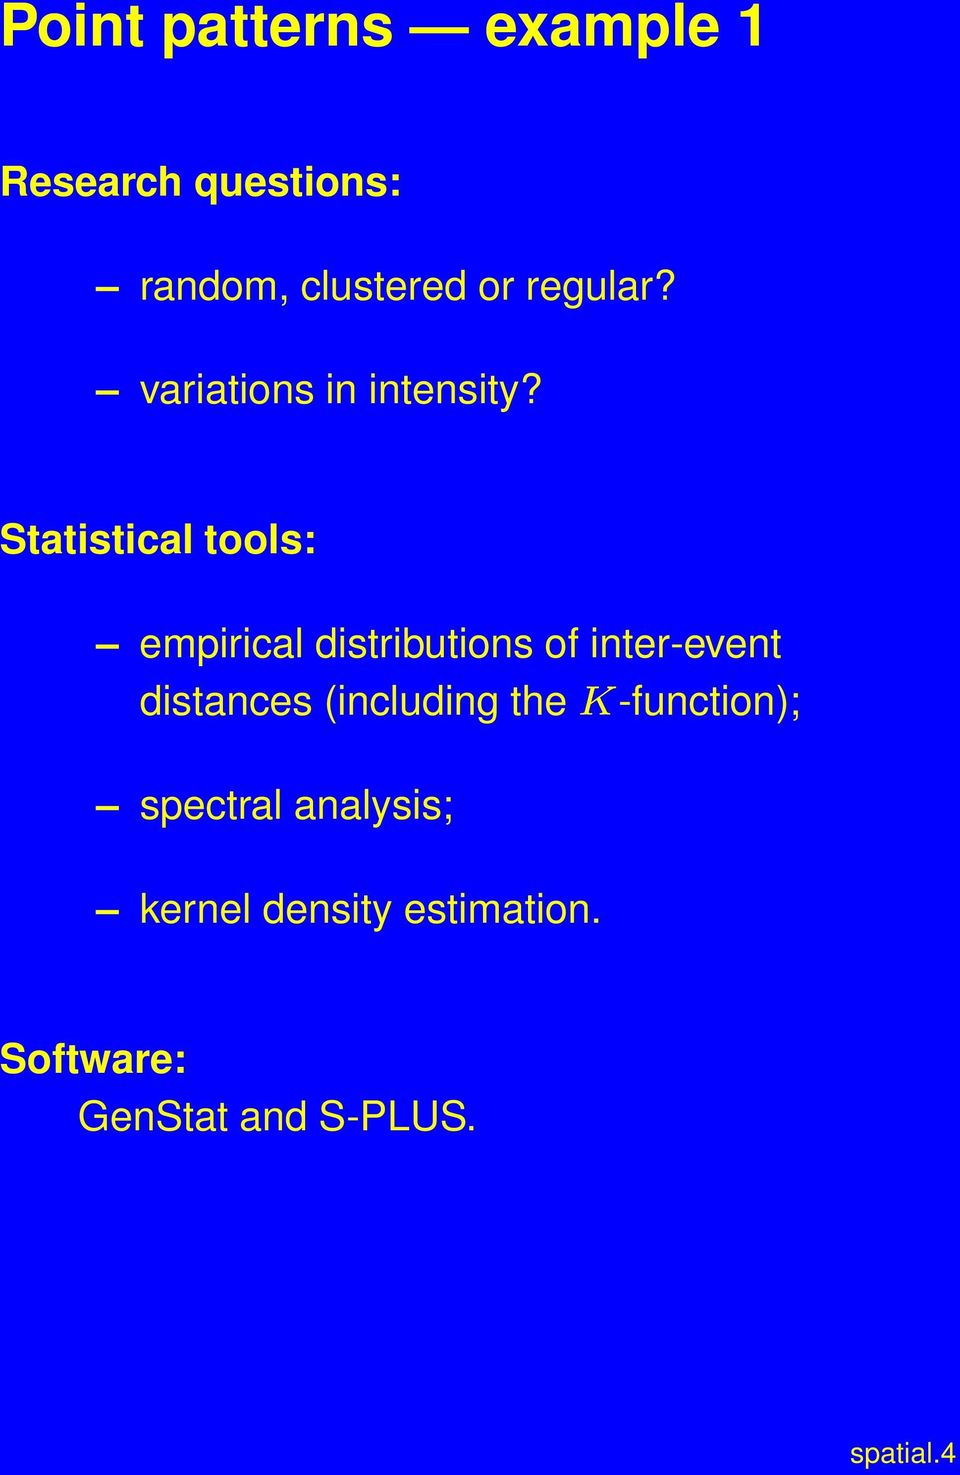 Statistical tools: empirical distributions of inter-event distances